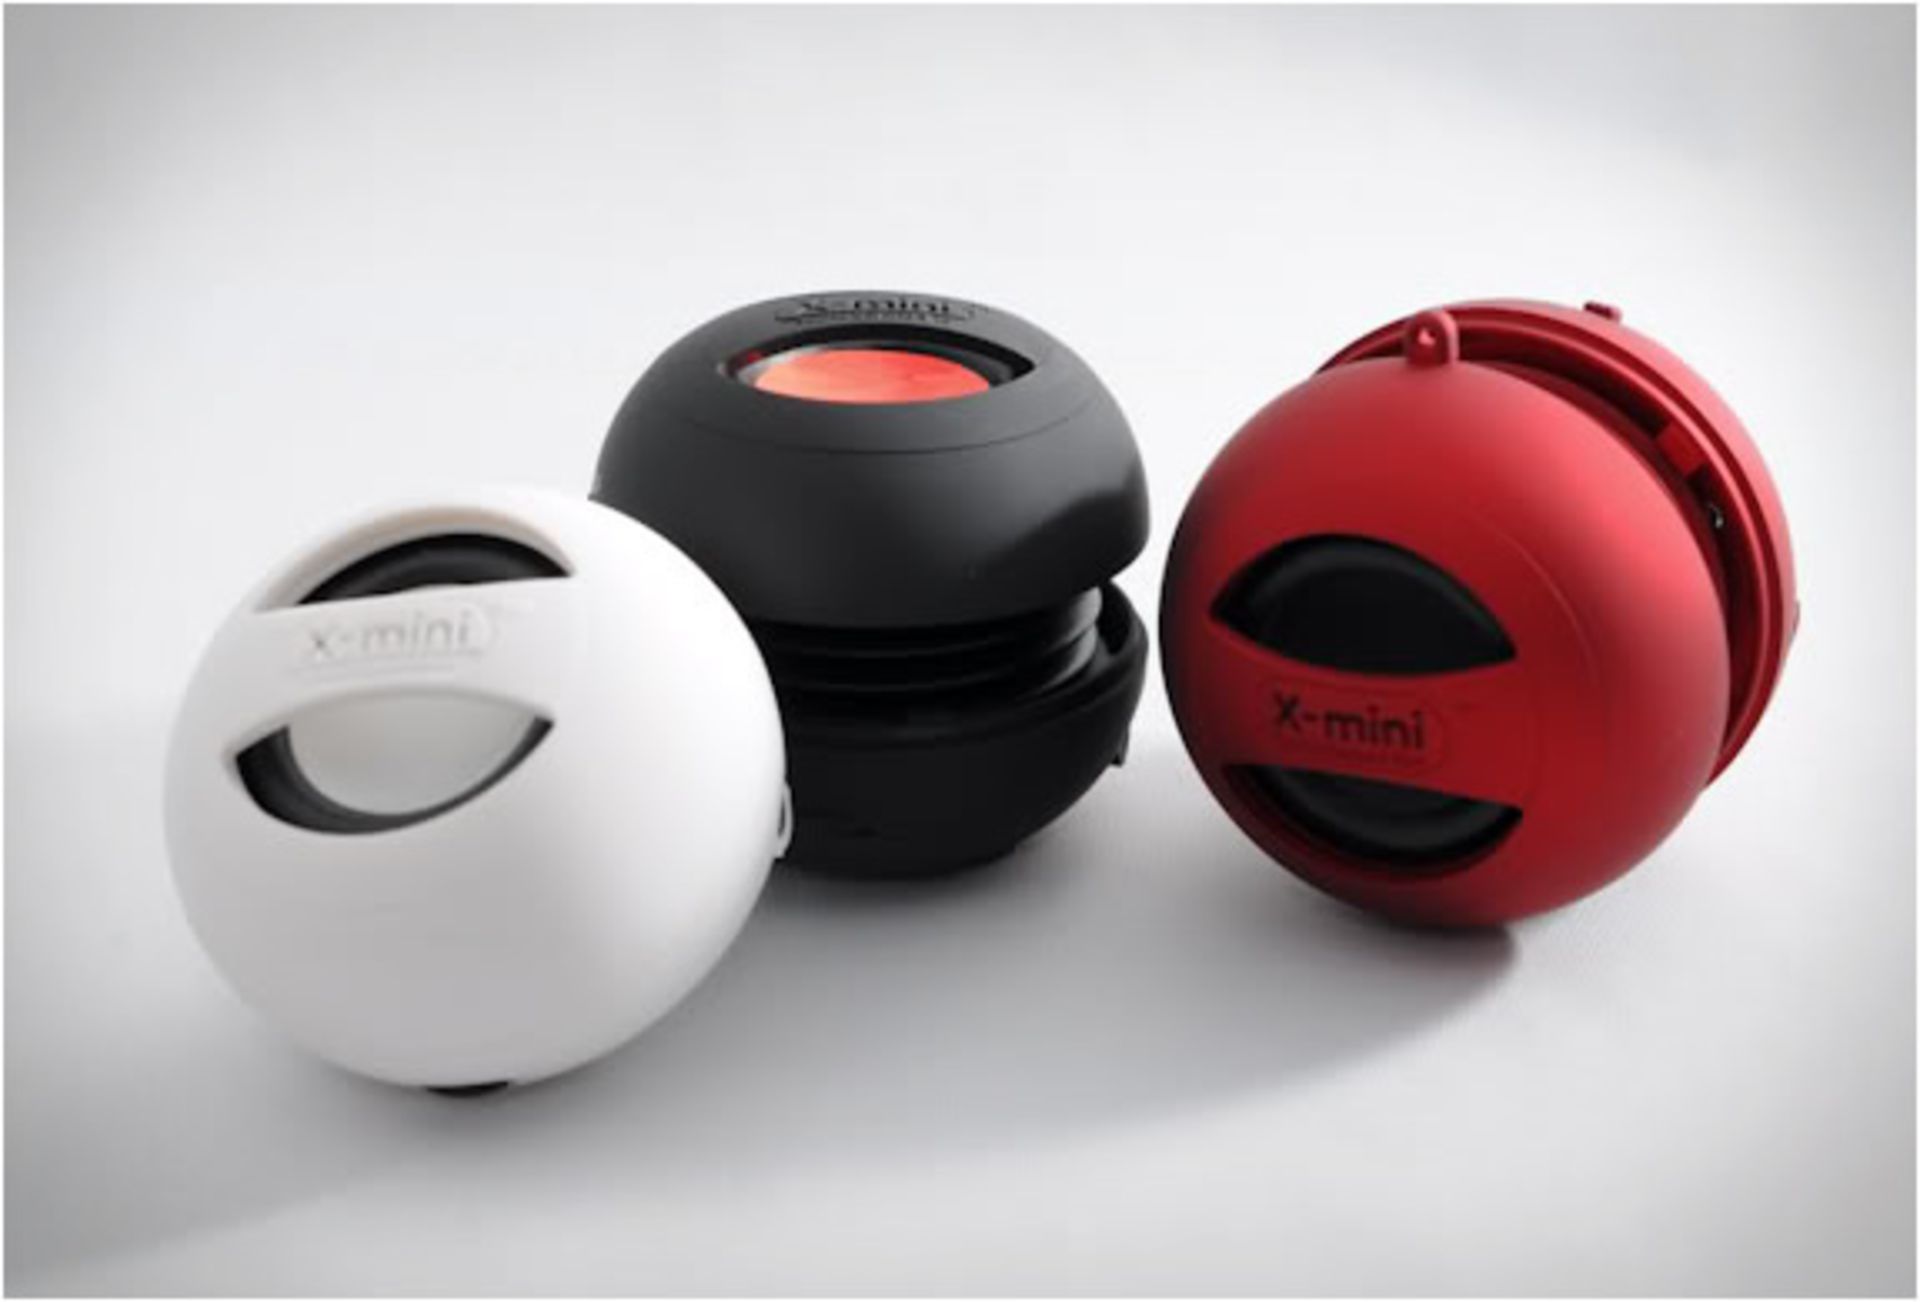 Brand New X-Mini Portable Capsule Speaker With Cables